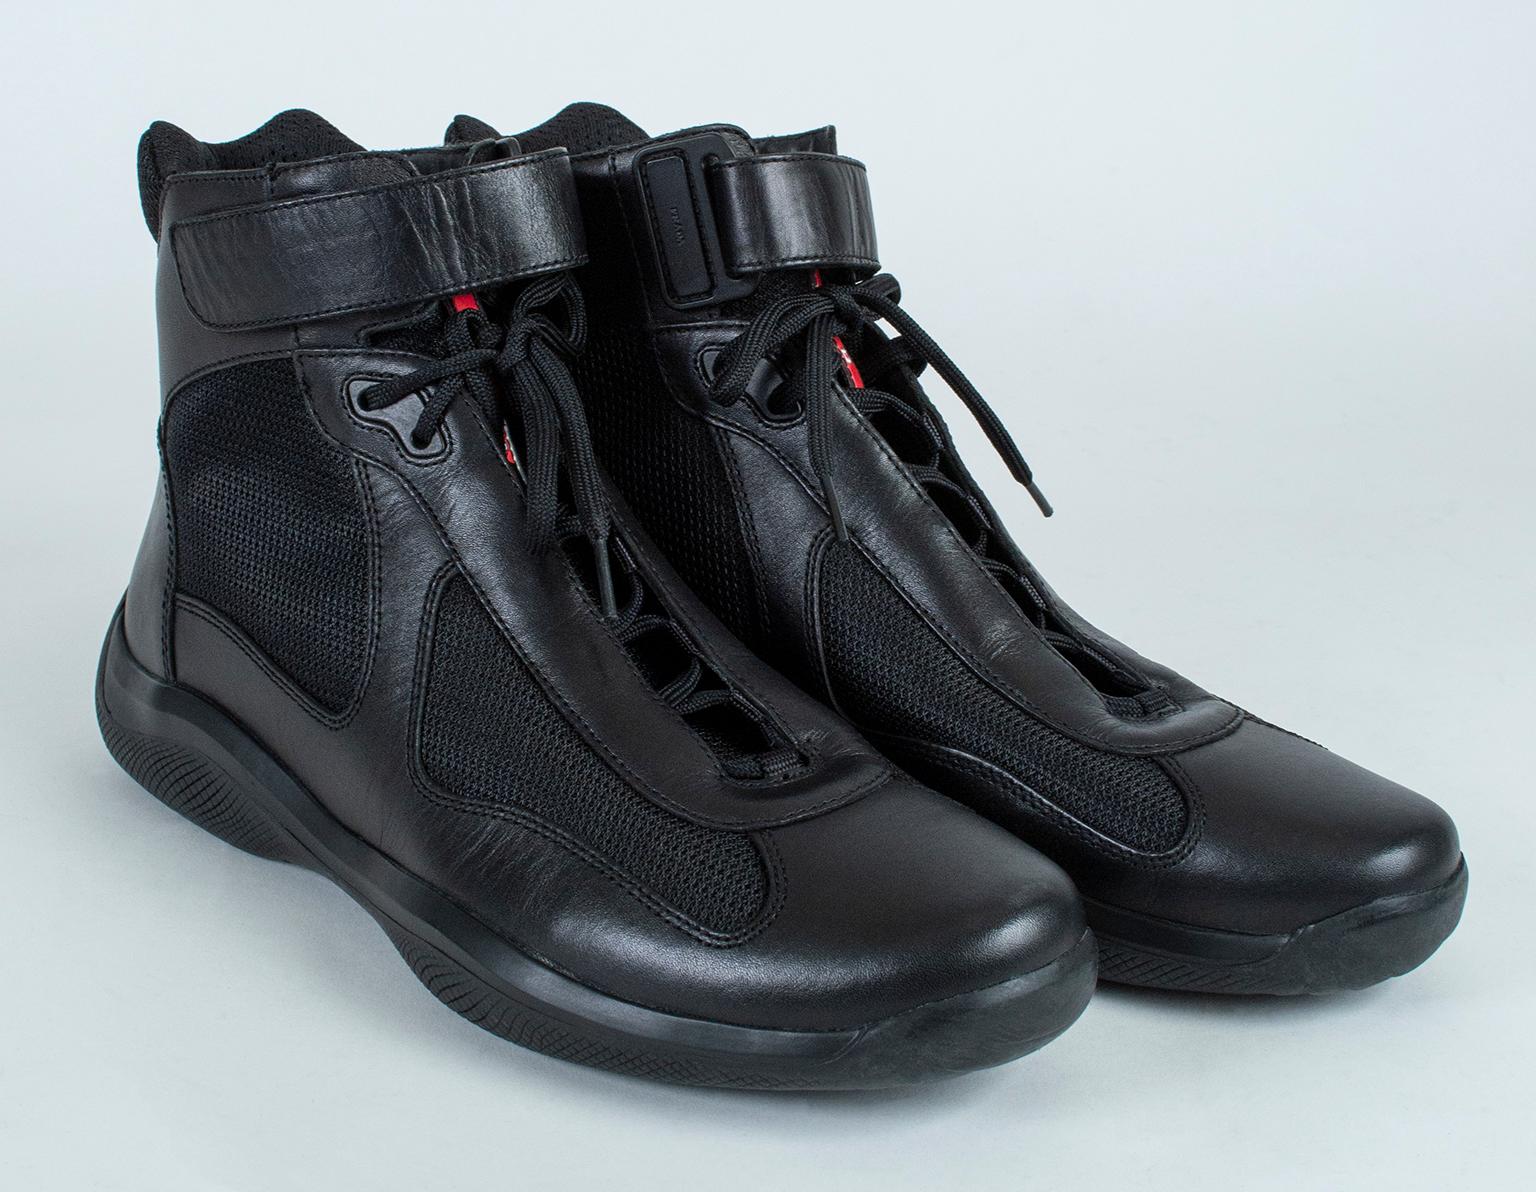 The ultimate in casual luxury, these high top sneakers offer comfort, practicality and loads of style. Sturdy but lightweight, they are the perfect addition to workout and athleisure wear as well as your favorite jeans.

Black leather high top